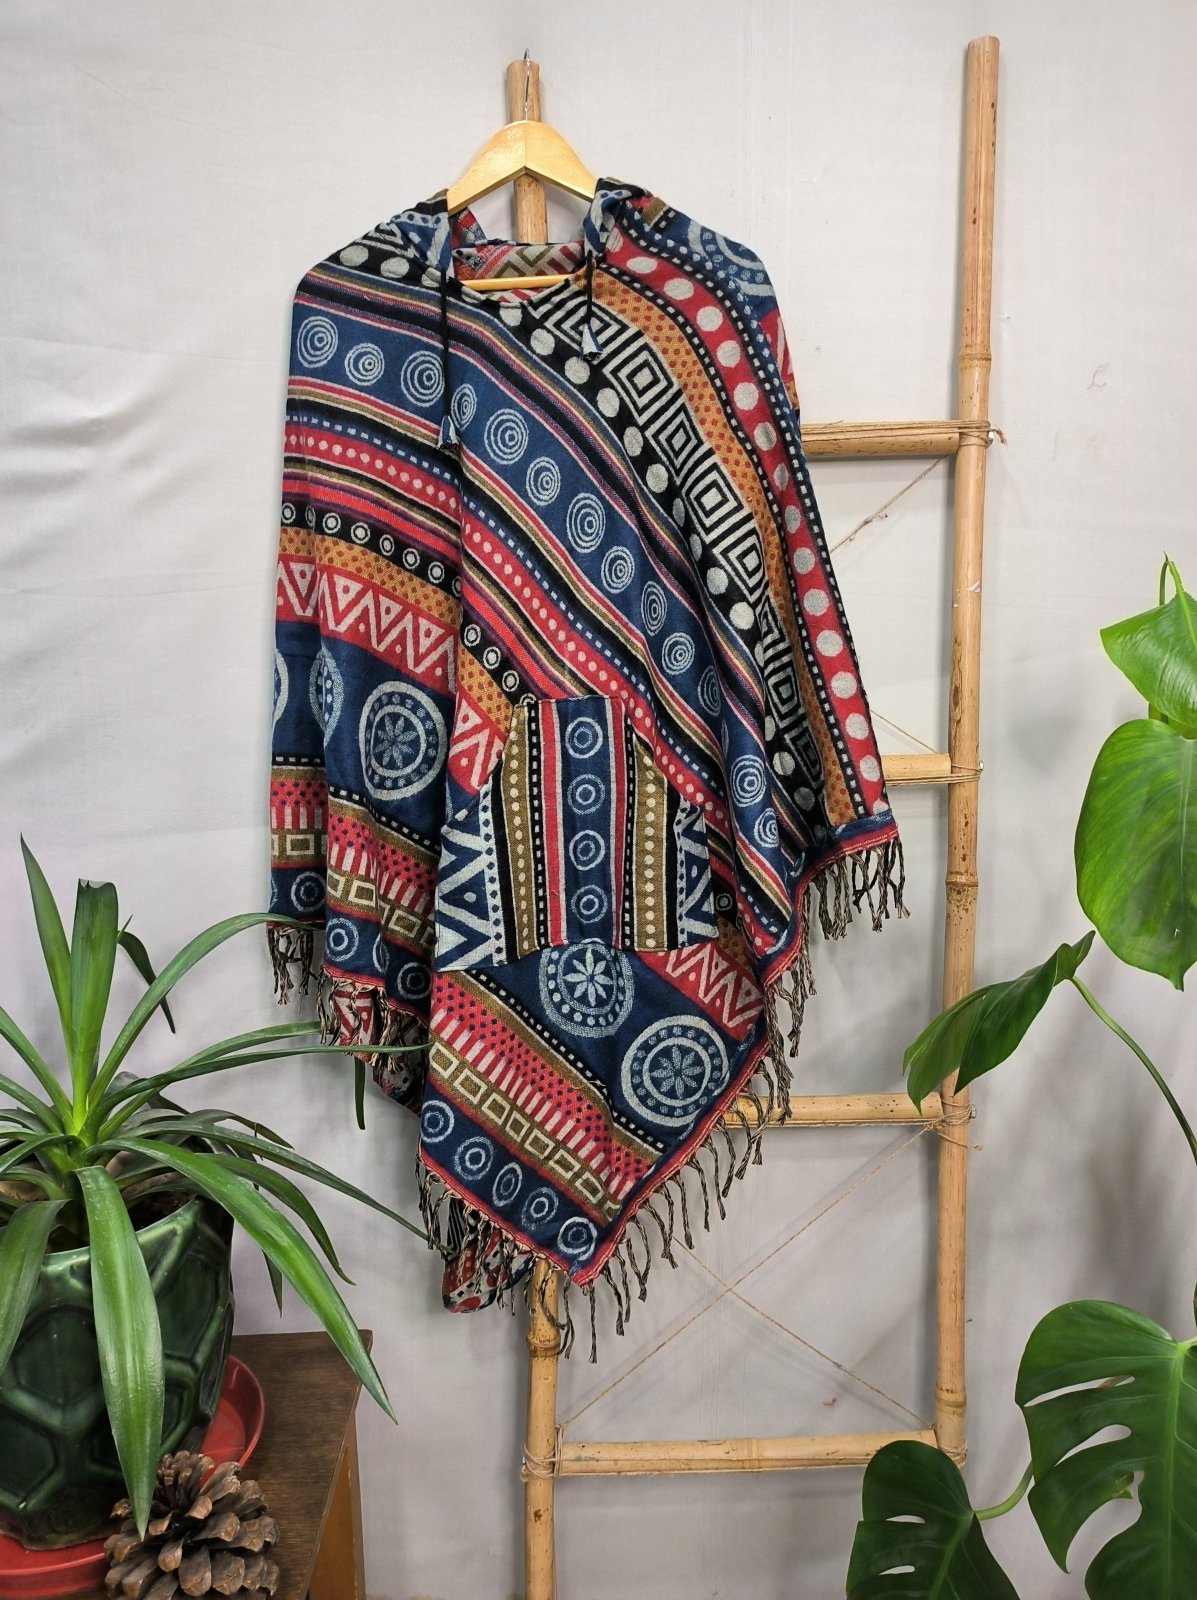 Yak Wool Blend Geometric Poncho with Hood and Pockets | Hand Loomed Urban Warm Hygge For His & Her | Unisex Black Red Pink Blue Boho Hooded - The Eastern Loom